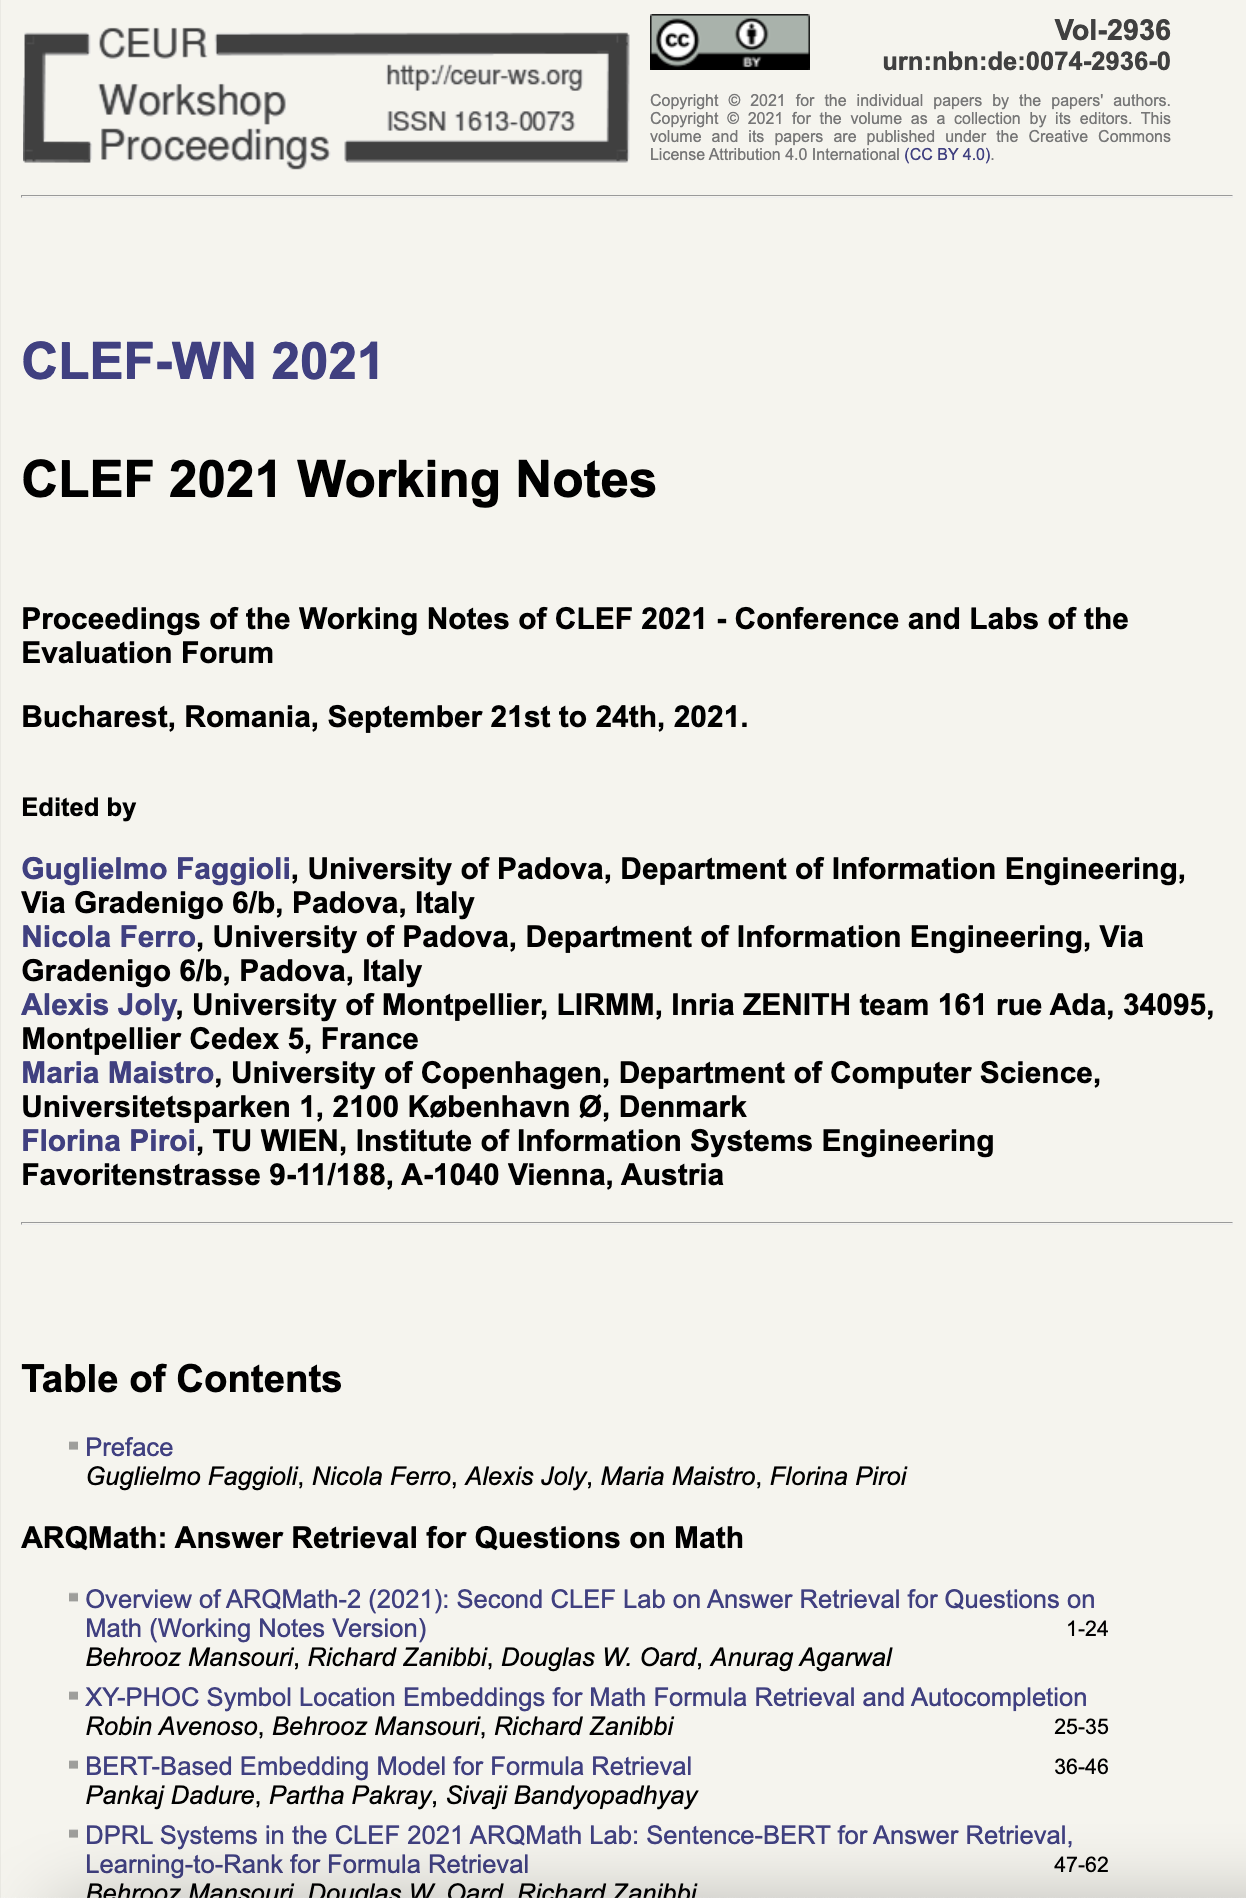 CLEF 2021 CEUR-WS Working Notes page